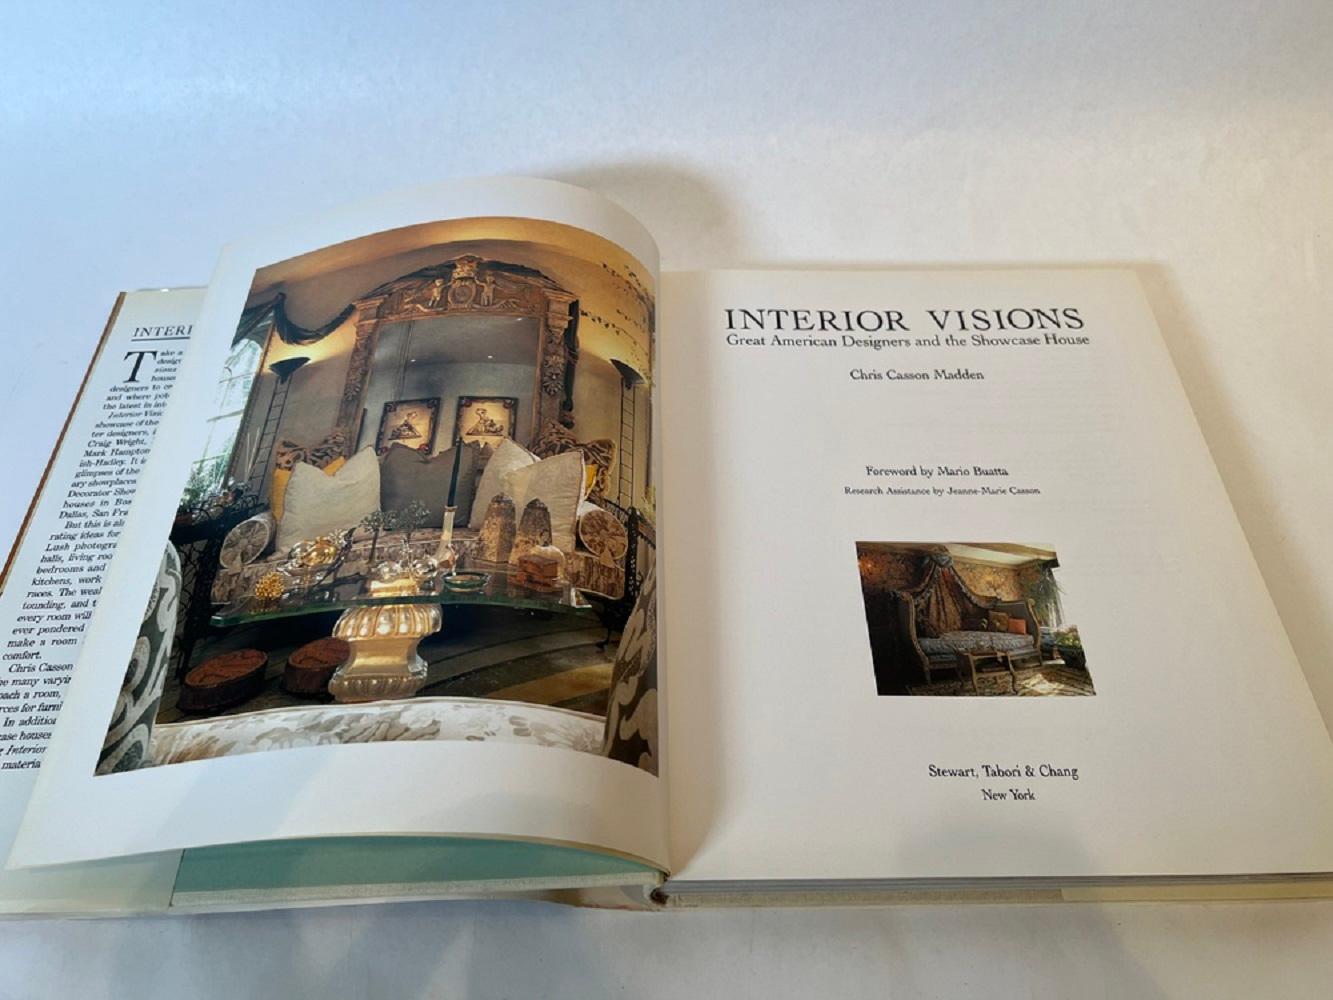 Interior Visions Great American Designers by Chris Casson Madden Hardcover 1988 For Sale 2